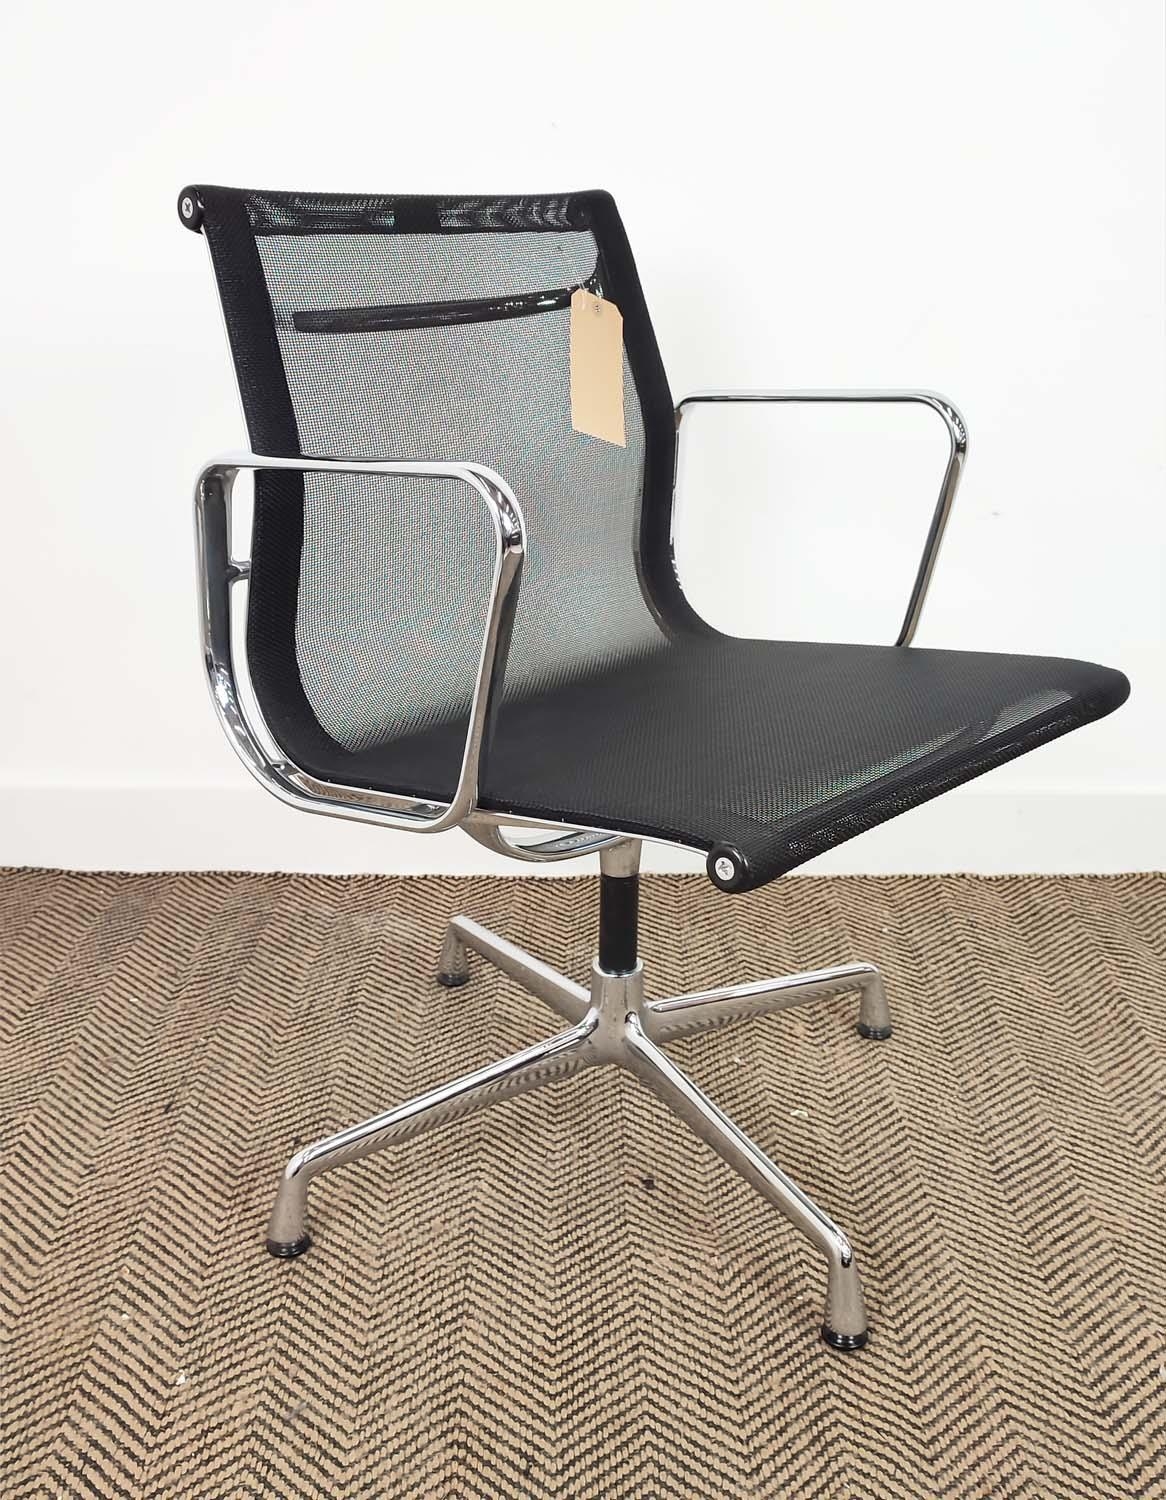 VITRA ALUMINIUM GROUP CHAIR, designed by Charles and Ray Eames, 57cm W x 85cm H, bears label.